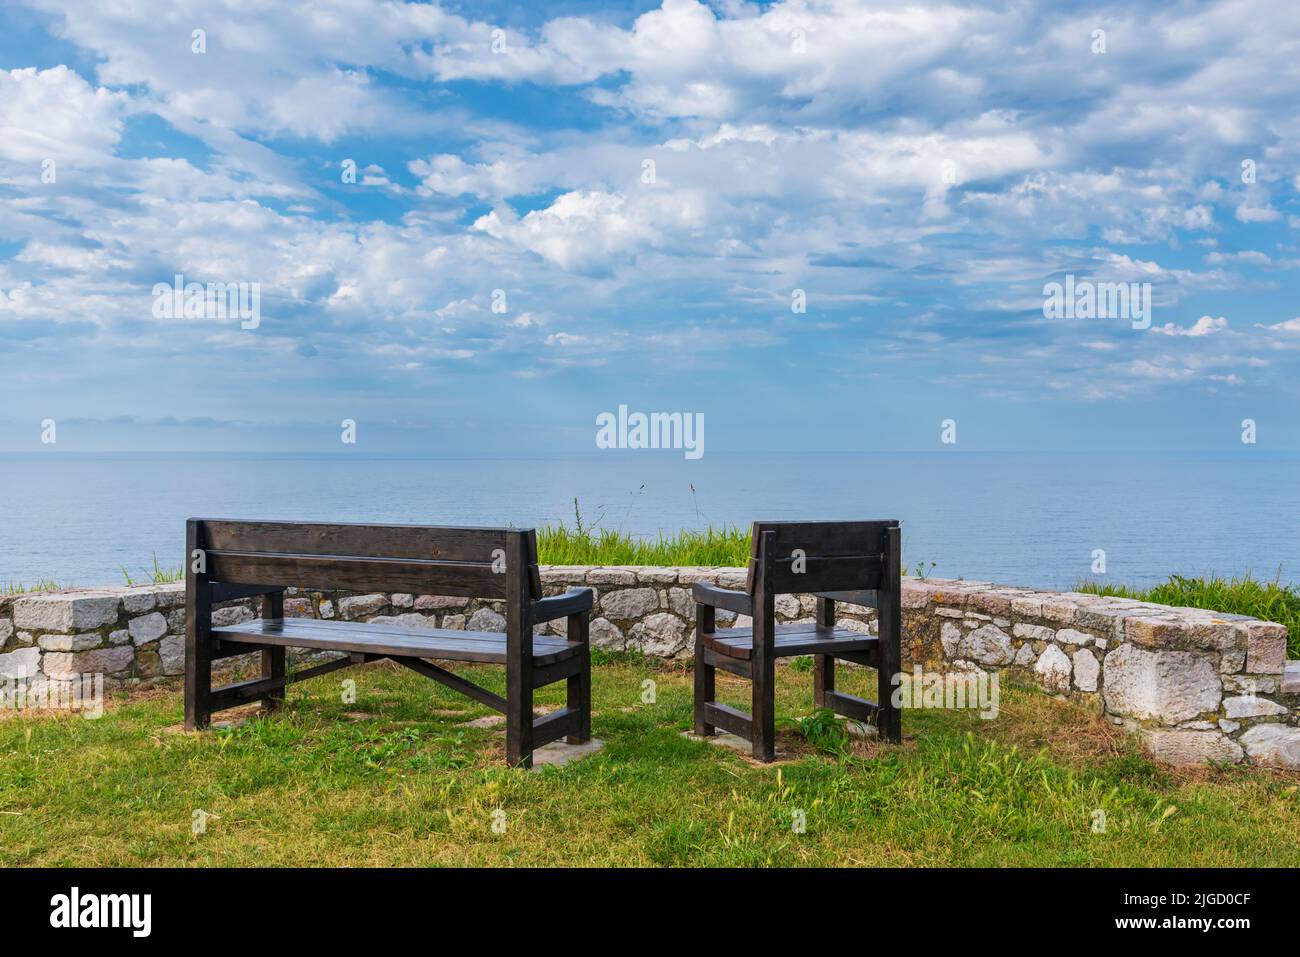 Benches on the Paseo de San Pedro, Llanes, with views of the Cantabrian Sea. Stock Photo